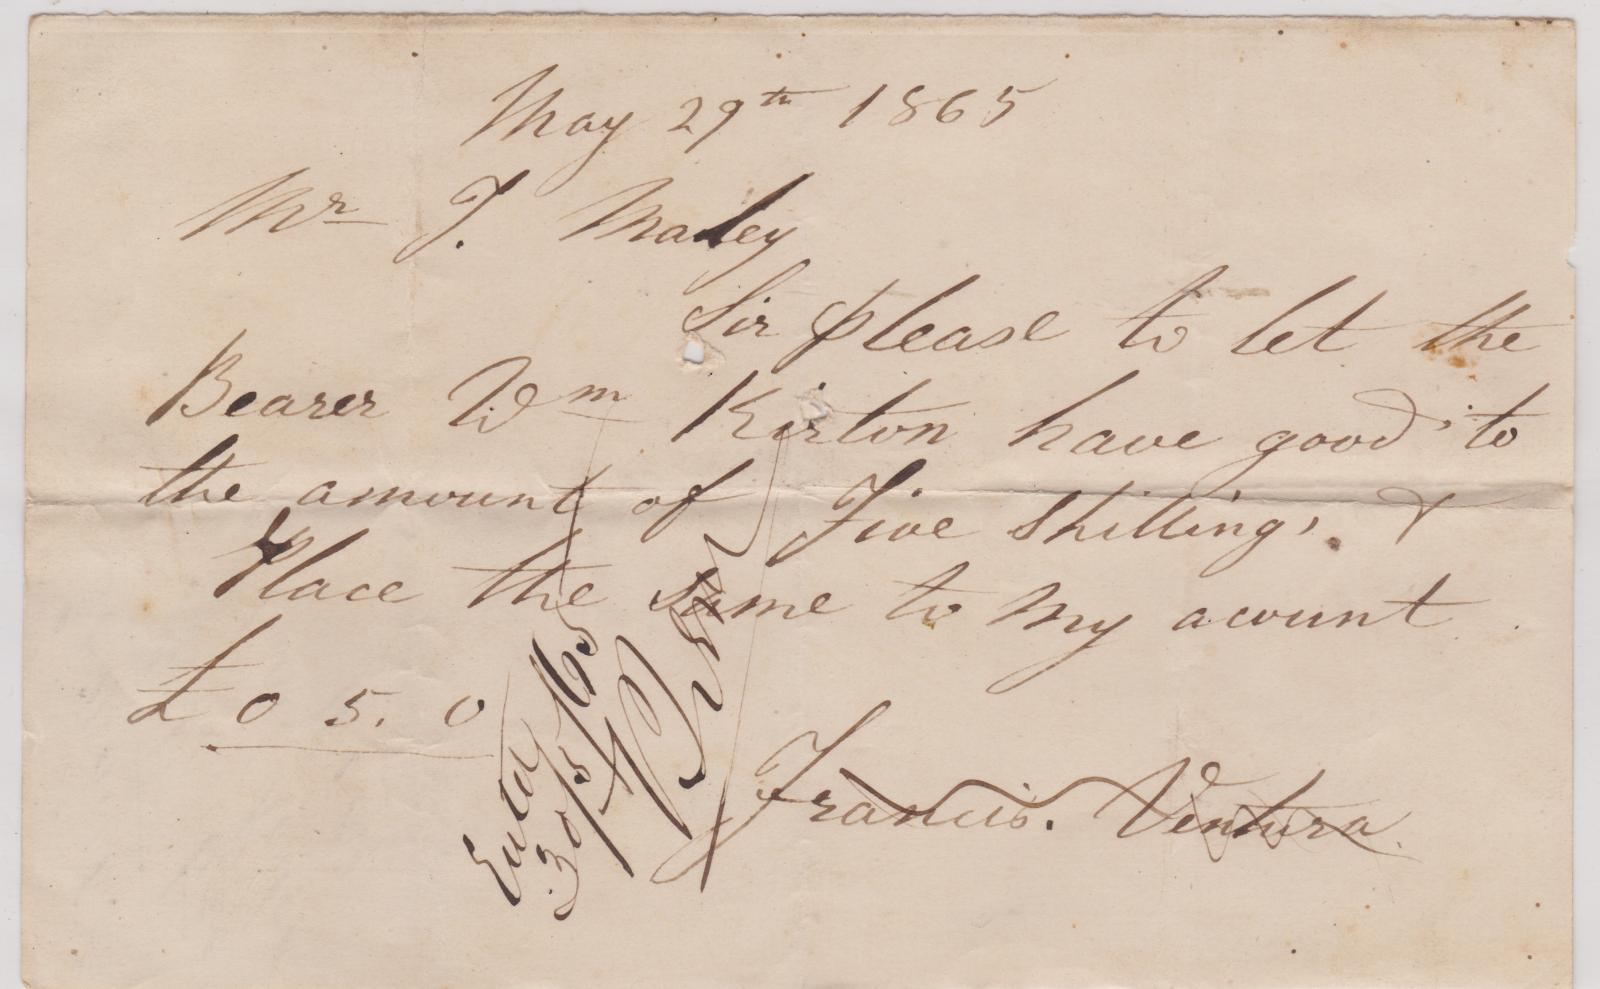 Promissory note from Francis Ventura